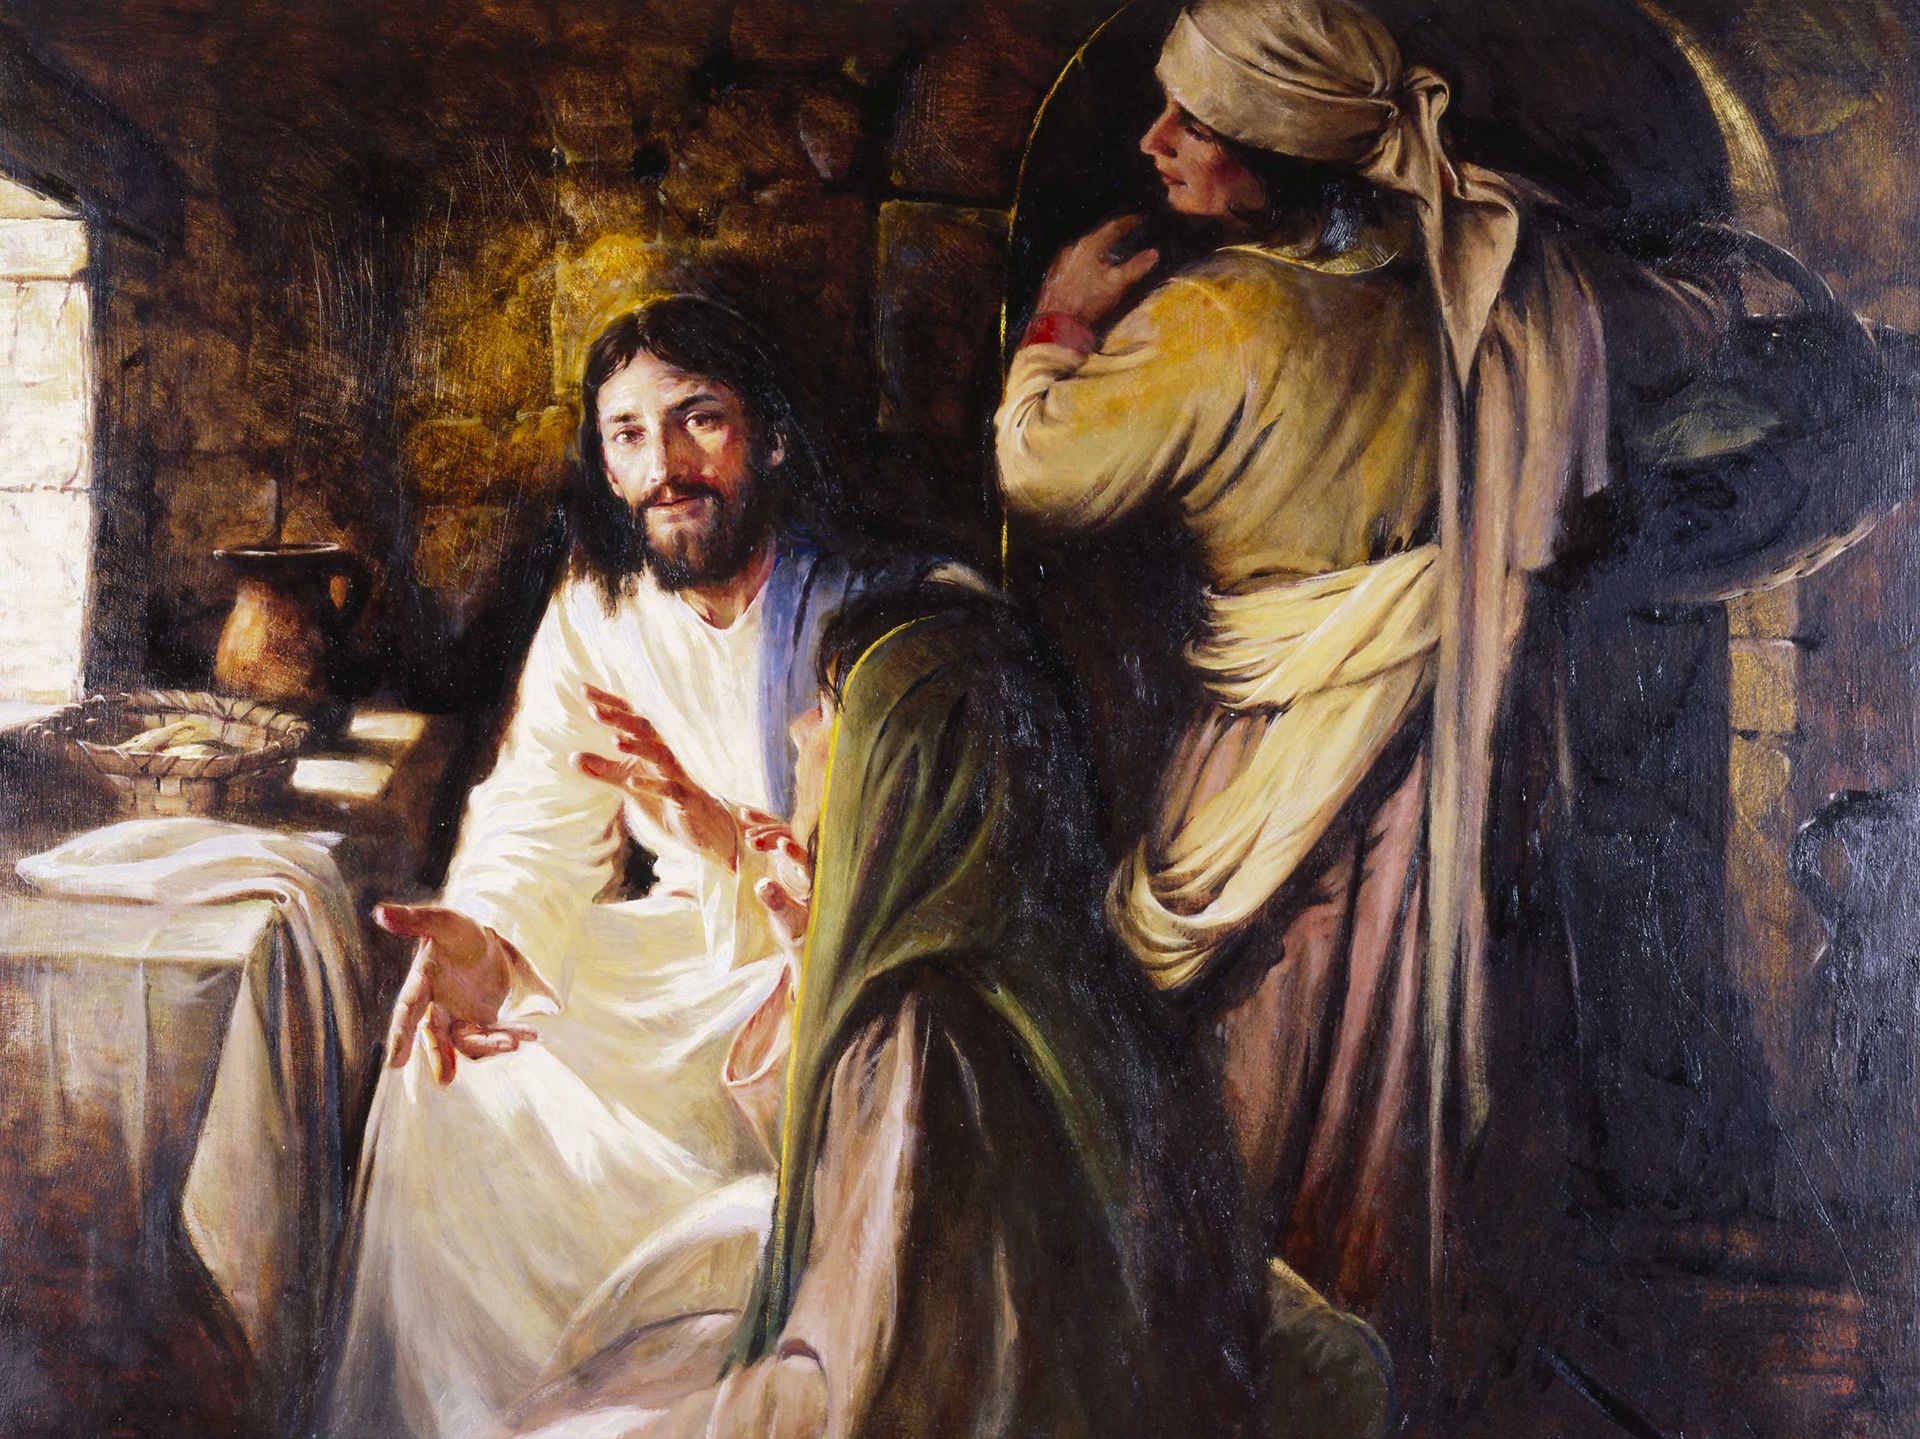 Jesus Christ depicted sitting in the home of Mary and Martha. Mary is listening to Christ as Martha is holding a tray or serving item.